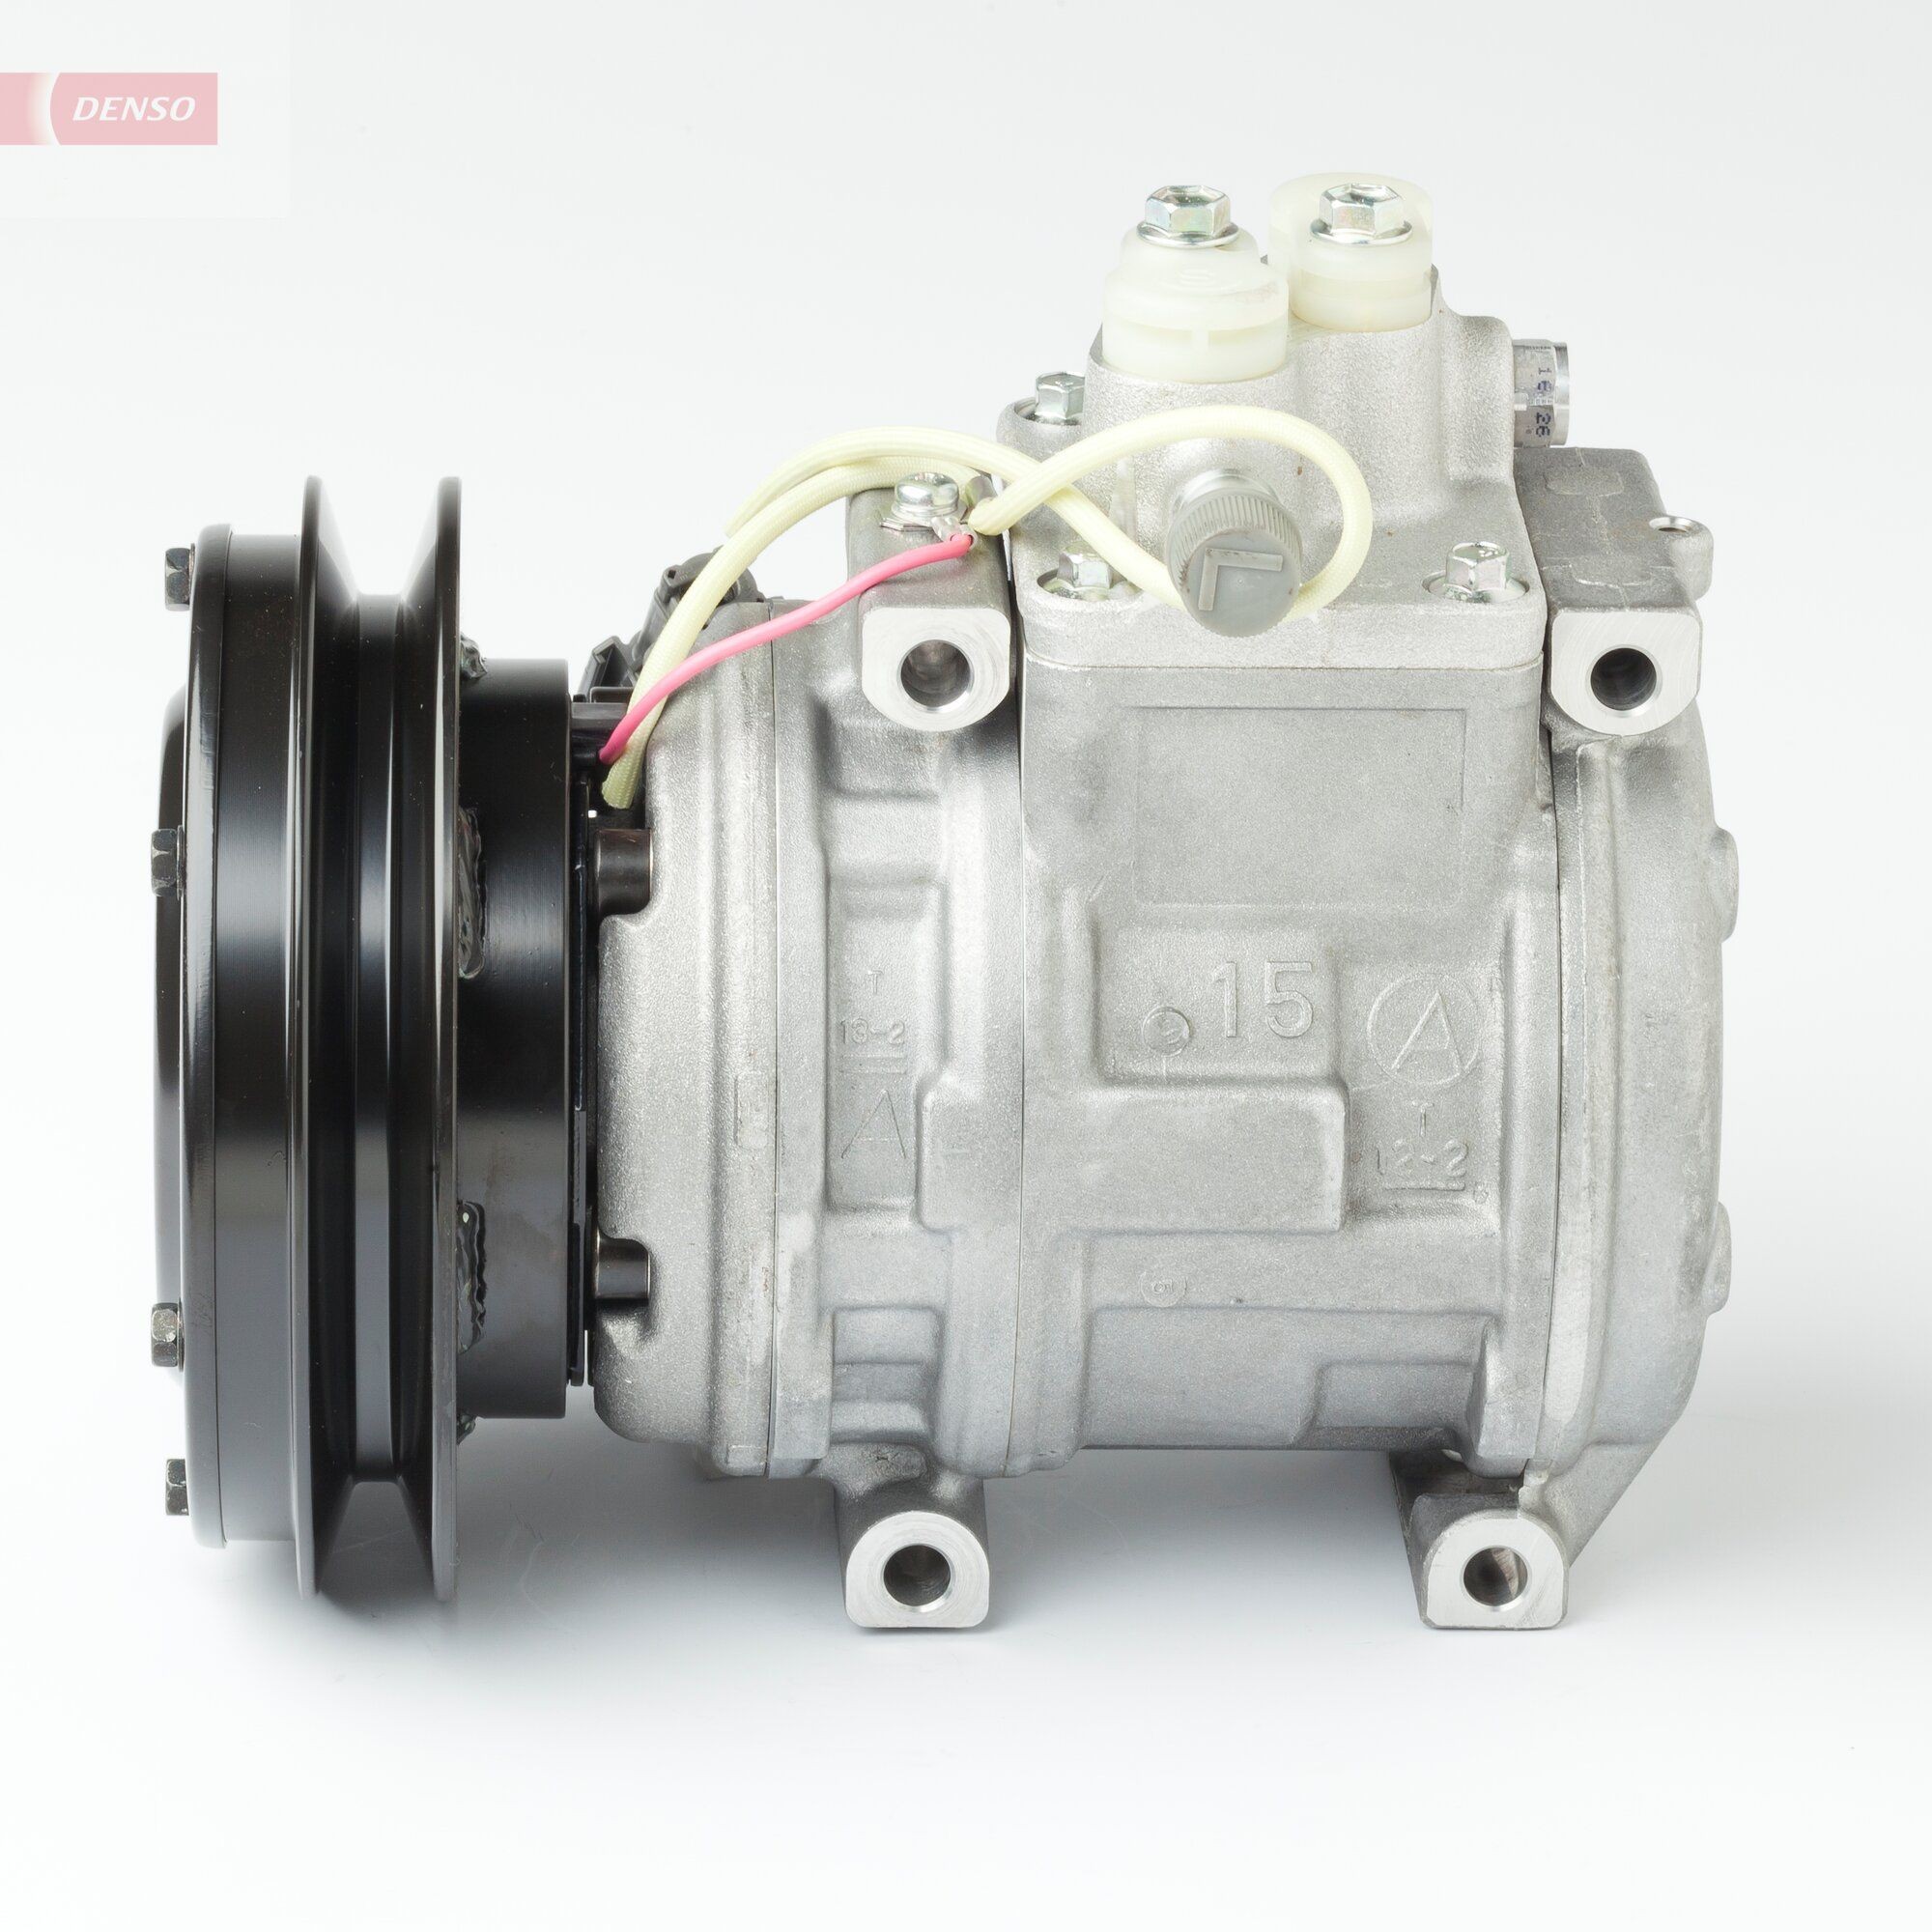 DENSO DCP99820 Air conditioning compressor 10PA15C, 24V, PAG 46, R 134a, with magnetic clutch